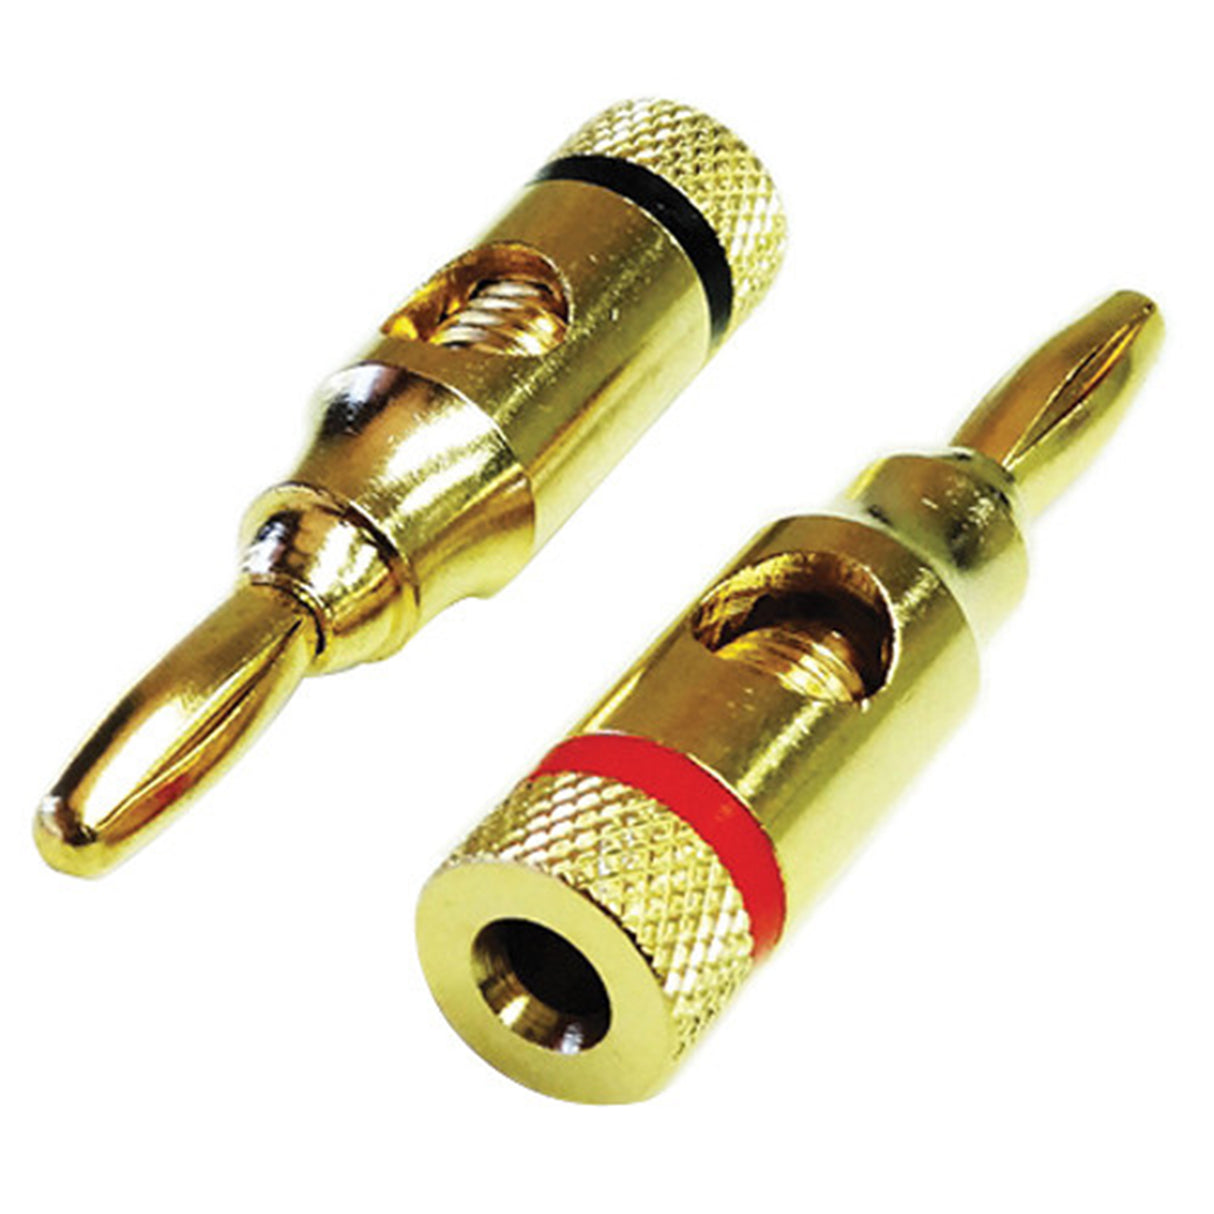 Connect Gold Plated Banana Plugs (Set of 10)